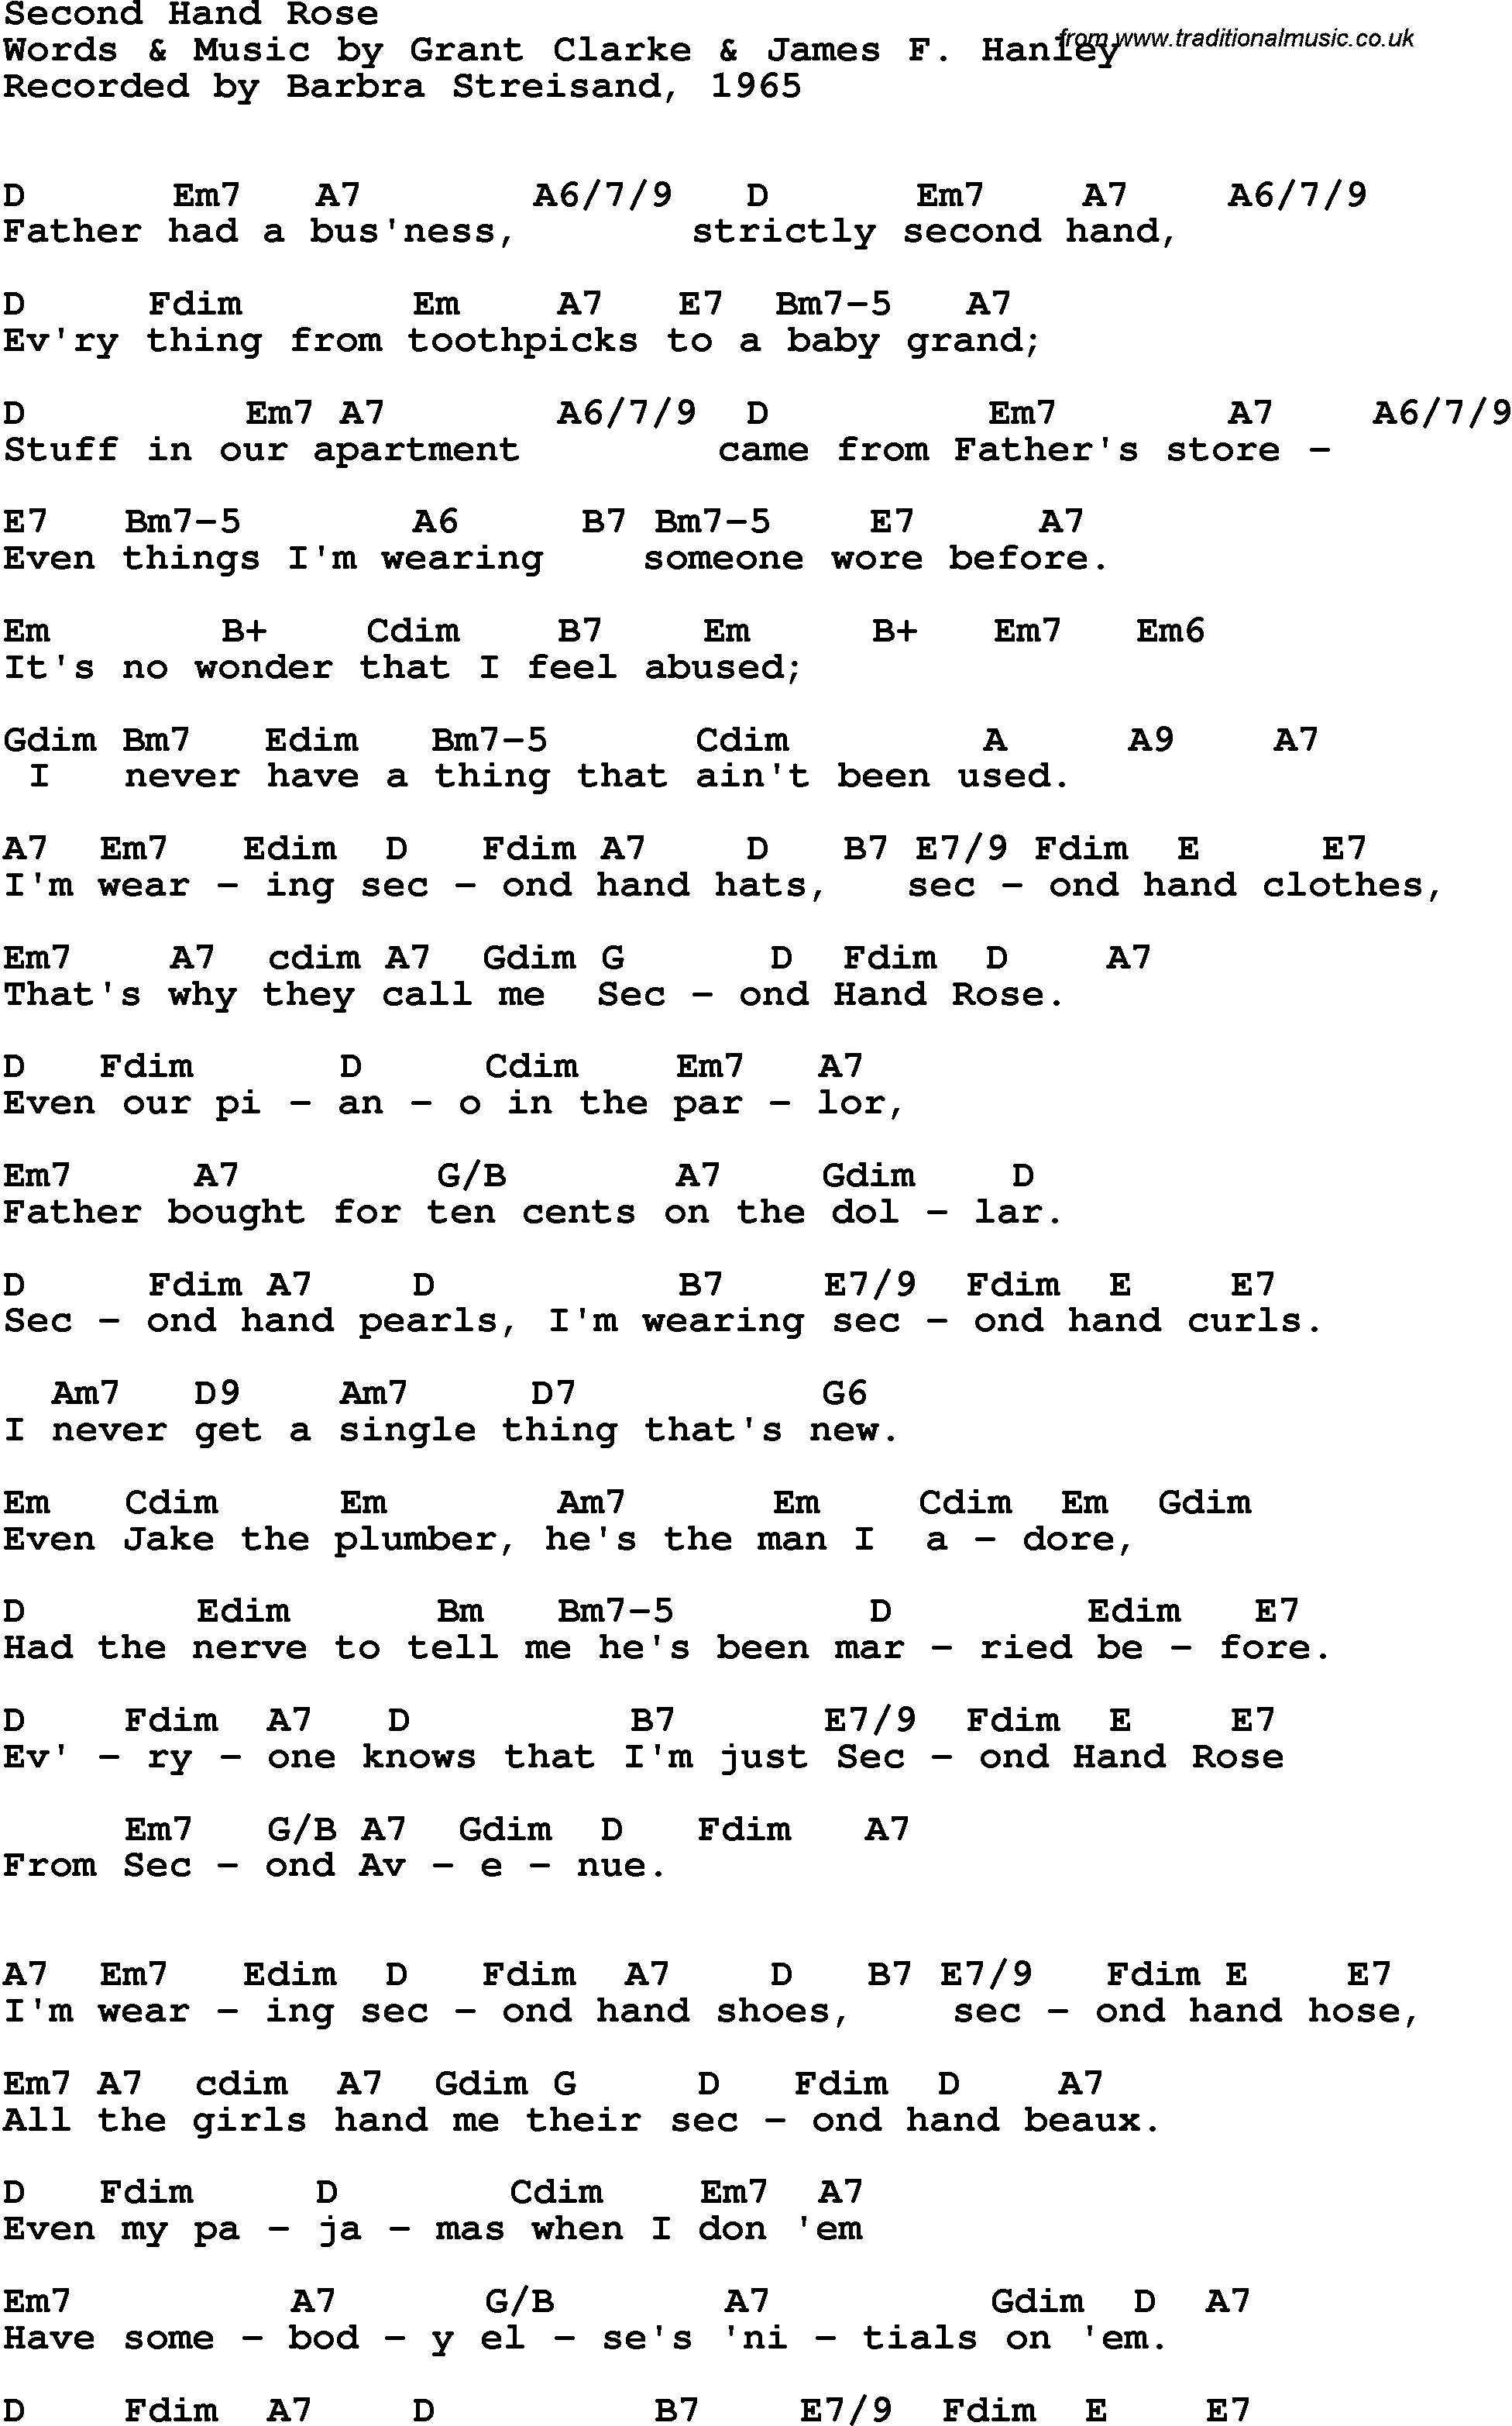 Song Lyrics with guitar chords for Second Hand Rose - Barbra Streisand, 1965